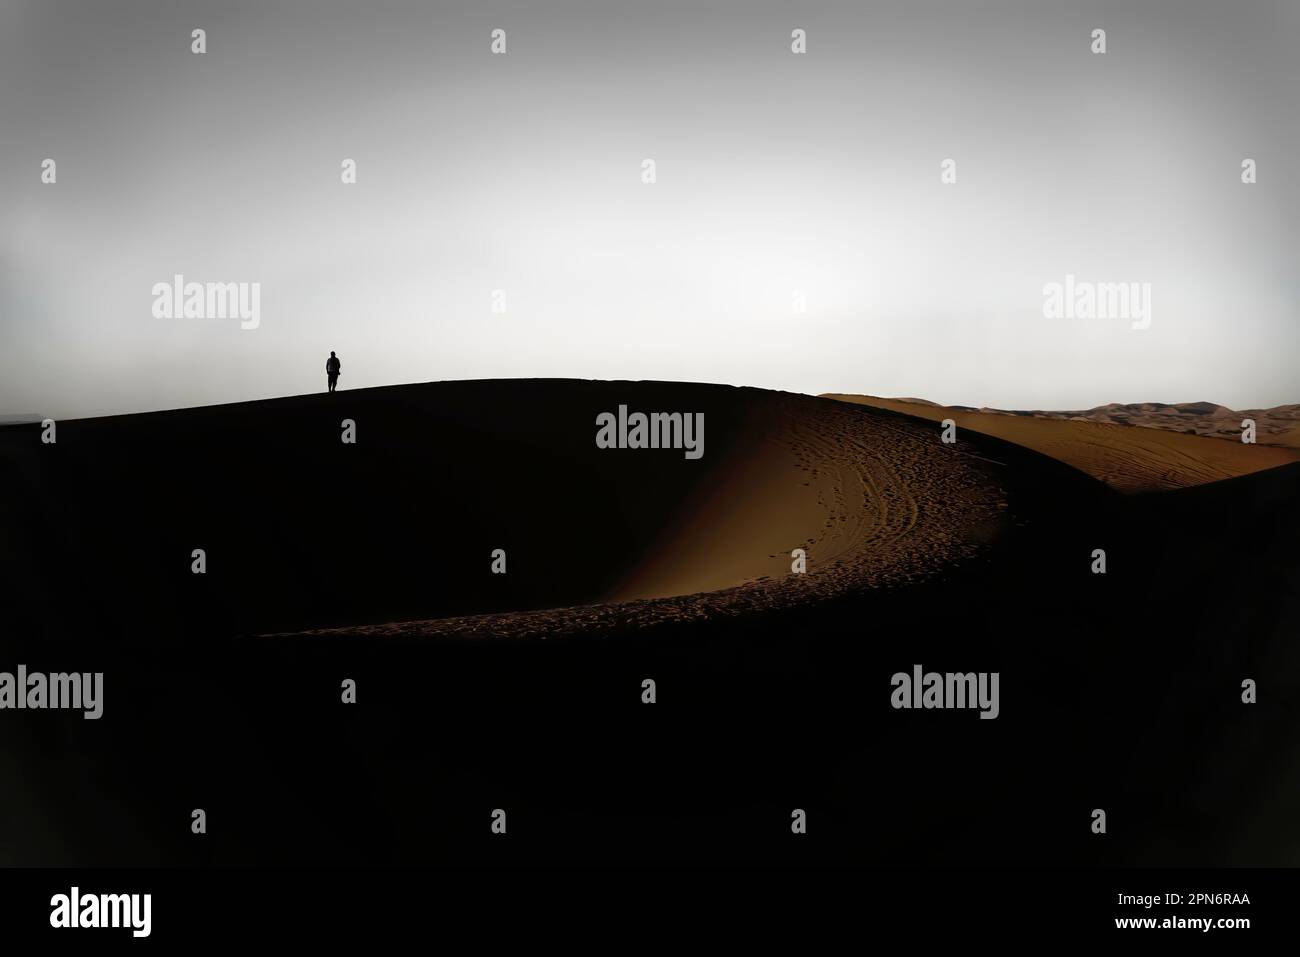 Arab man stands alone in the desert and watching the sunset. Stock Photo